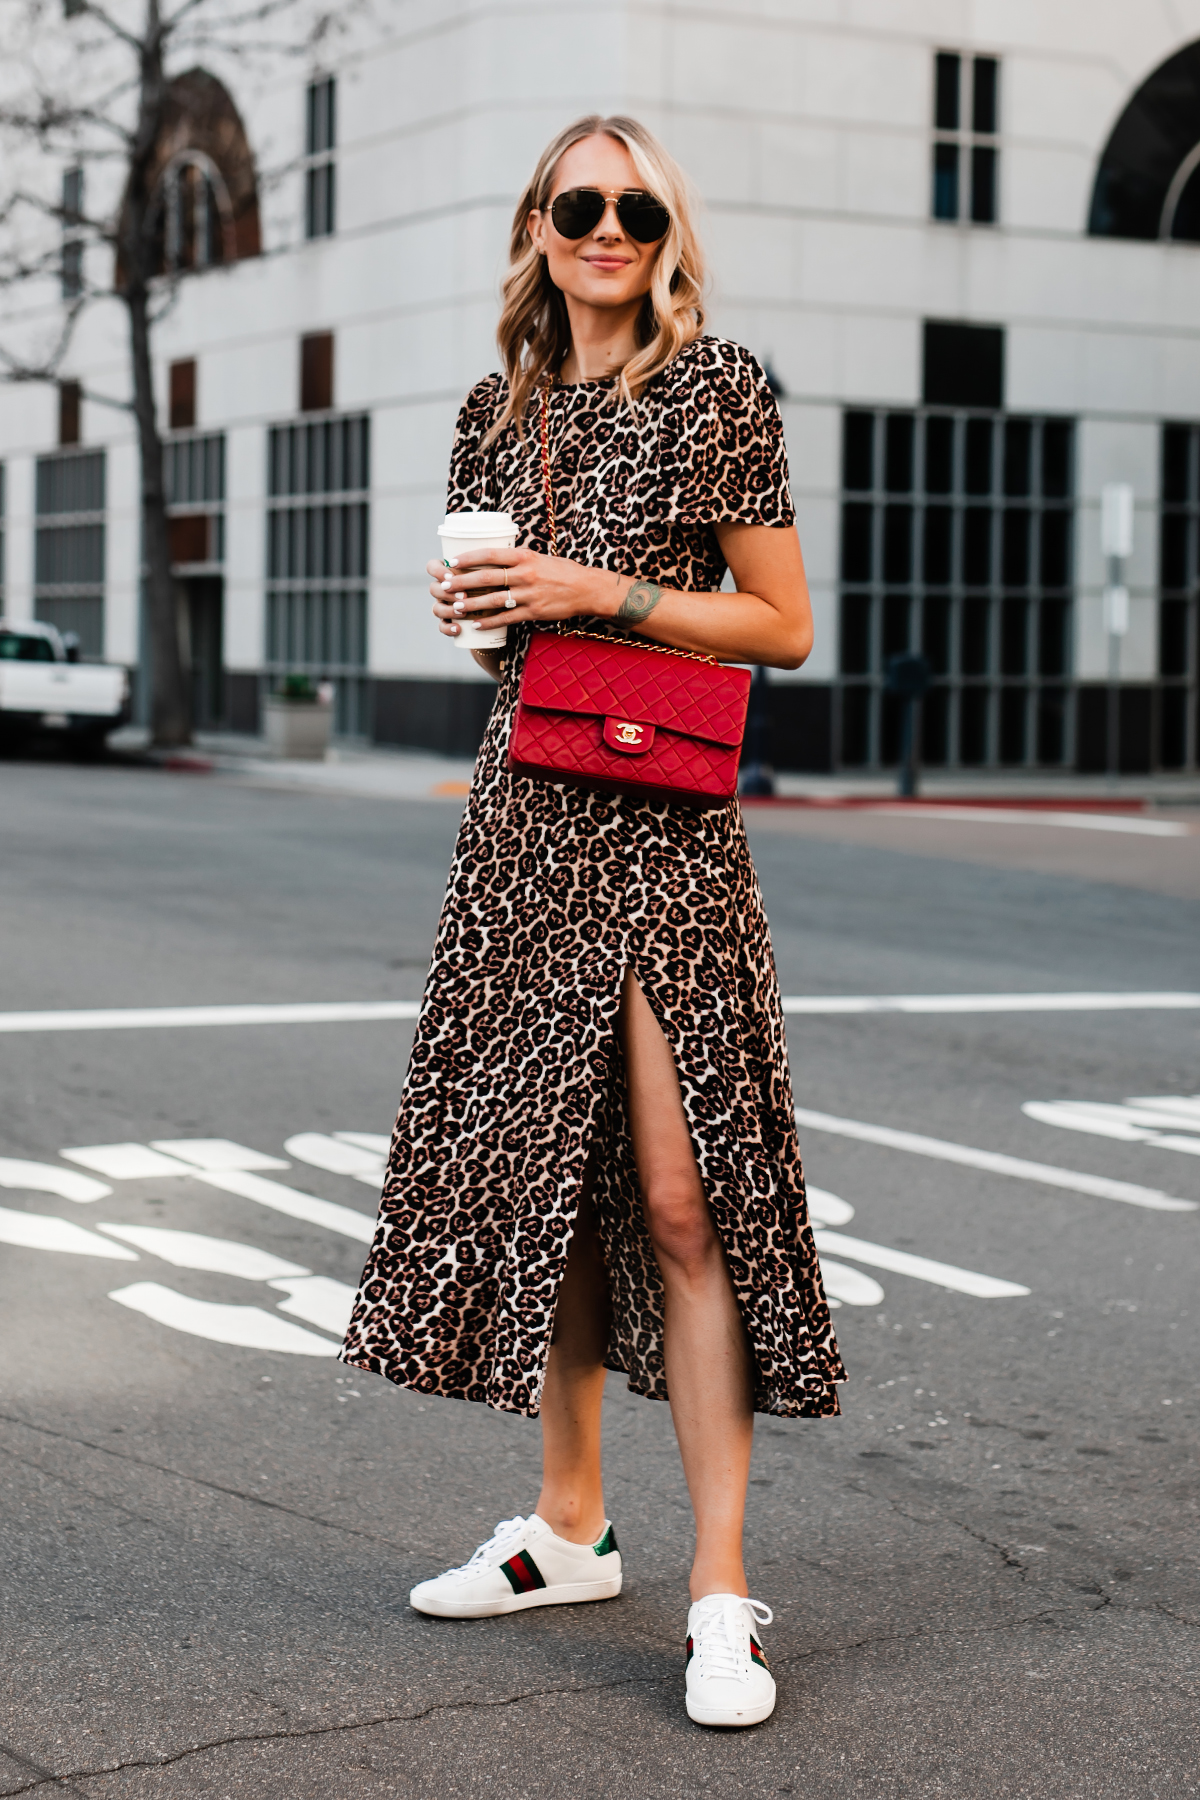 Dramatic Maxi Dresses and Sneakers (Two Ways To Style)